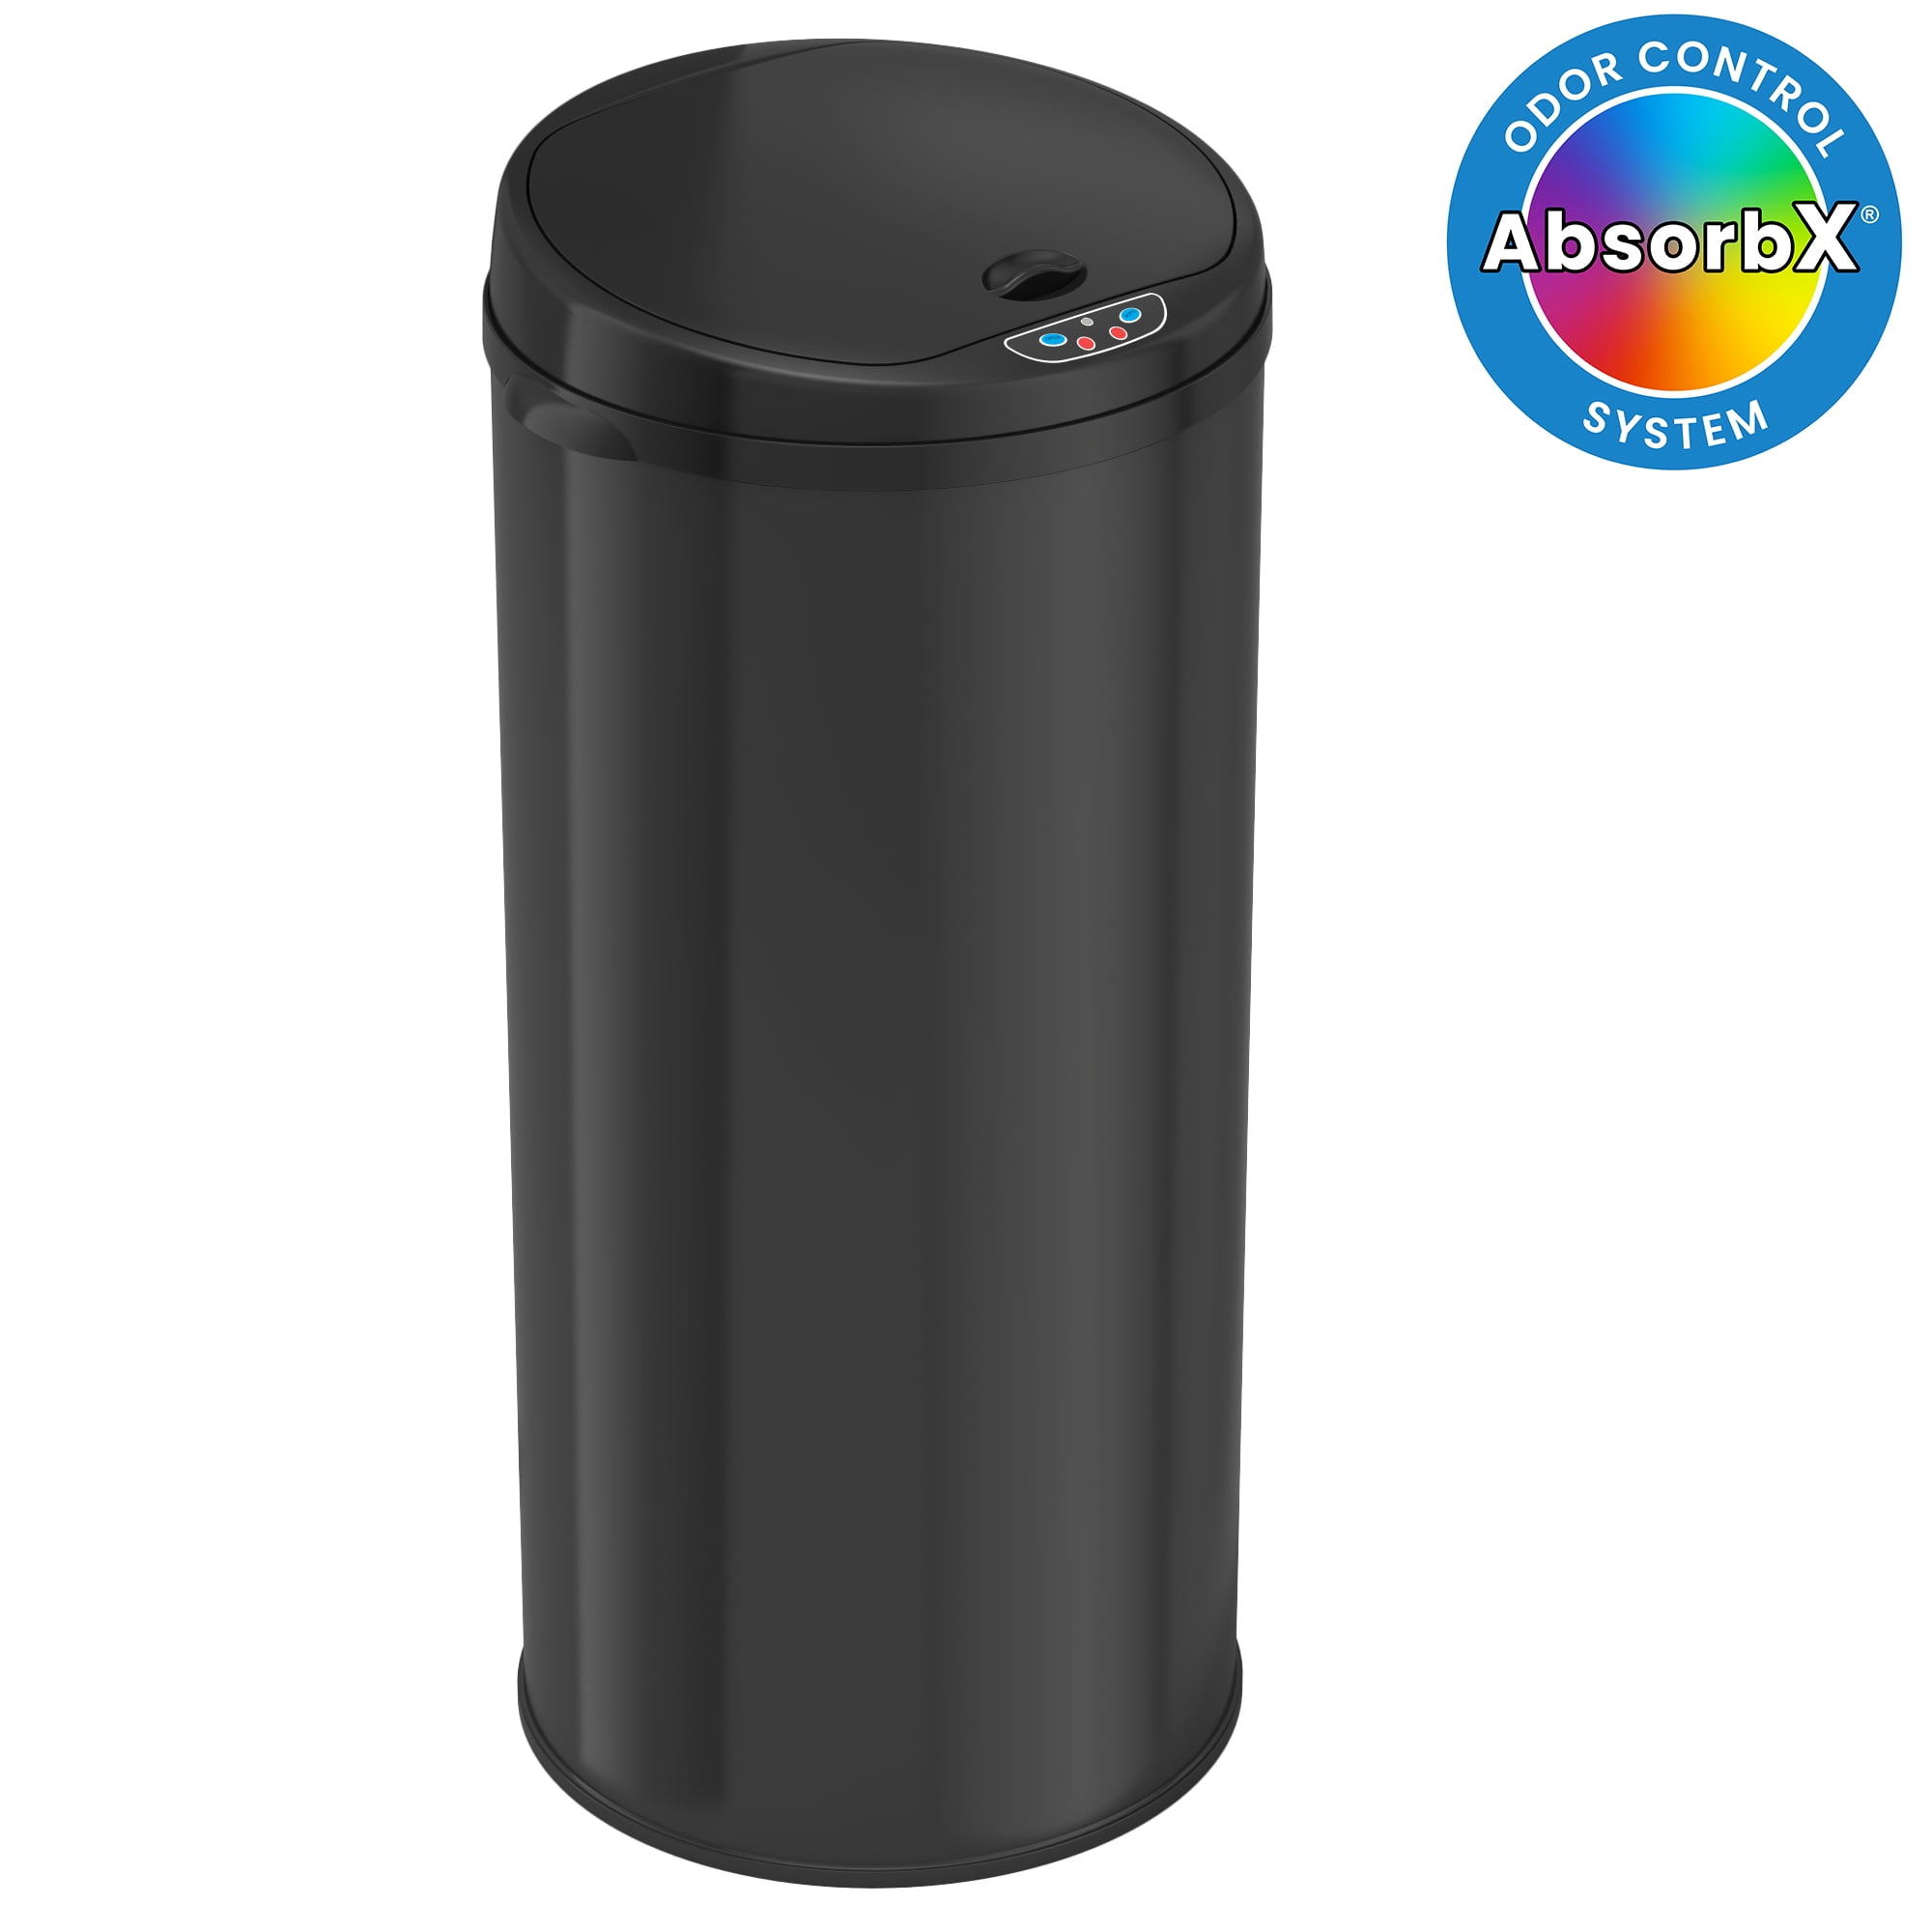 iTouchless Deodorizer Stainless Steel Automatic Touchless Trash Can, Silver/Black, 13 gallon